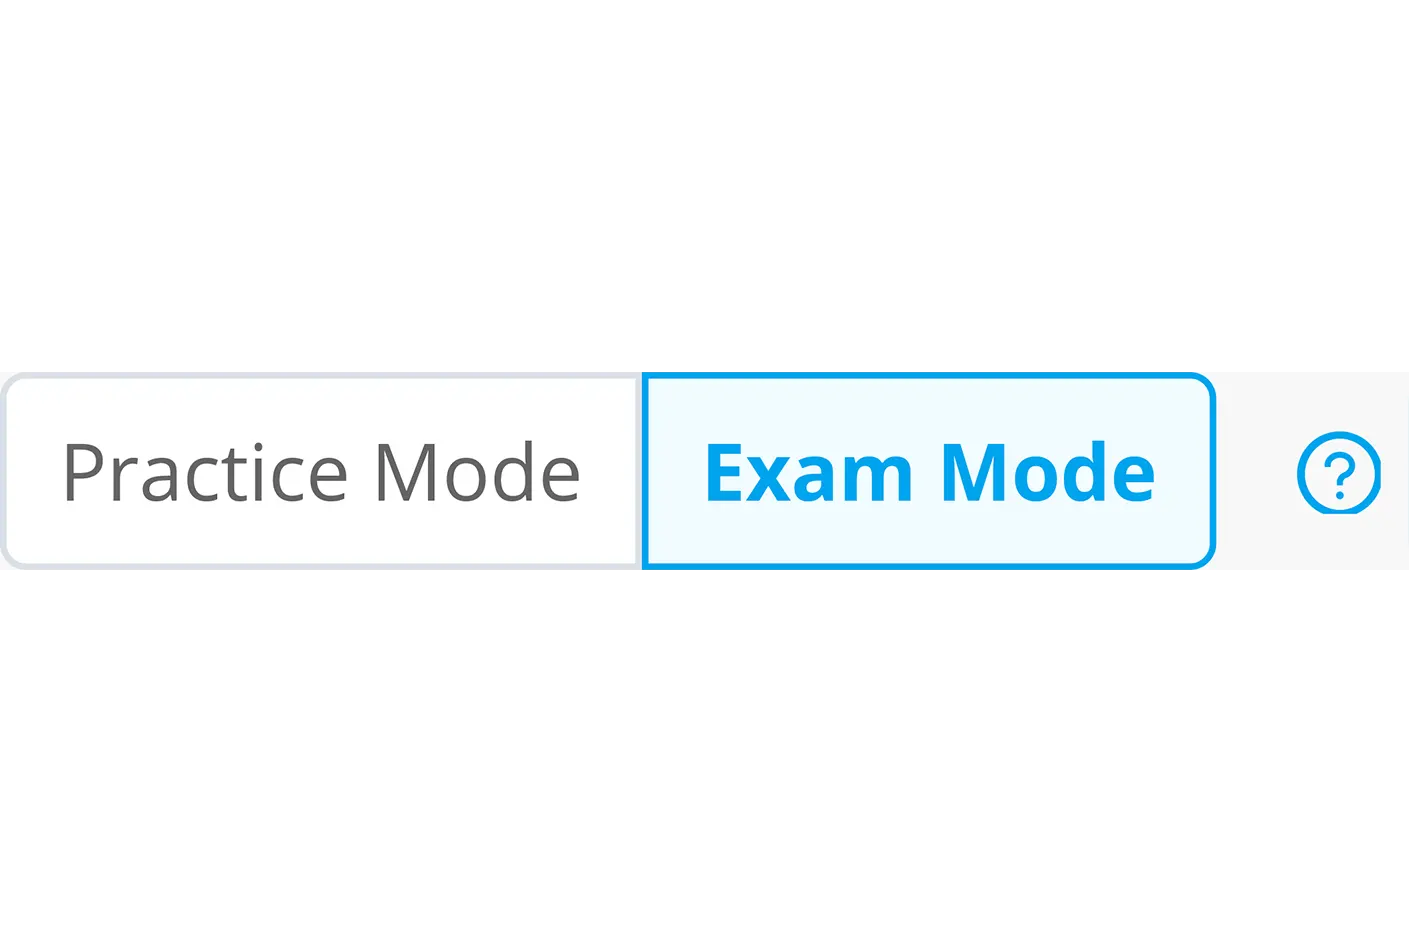 There is a screenshot of exam mode select for Aptitude Test practice test